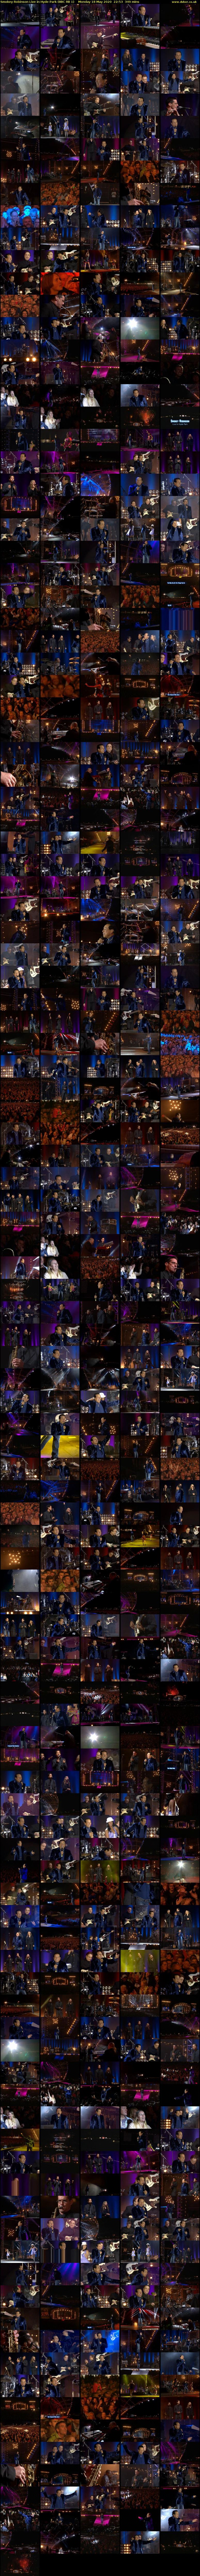 Smokey Robinson Live in Hyde Park (BBC RB 1) Monday 18 May 2020 22:53 - 04:42